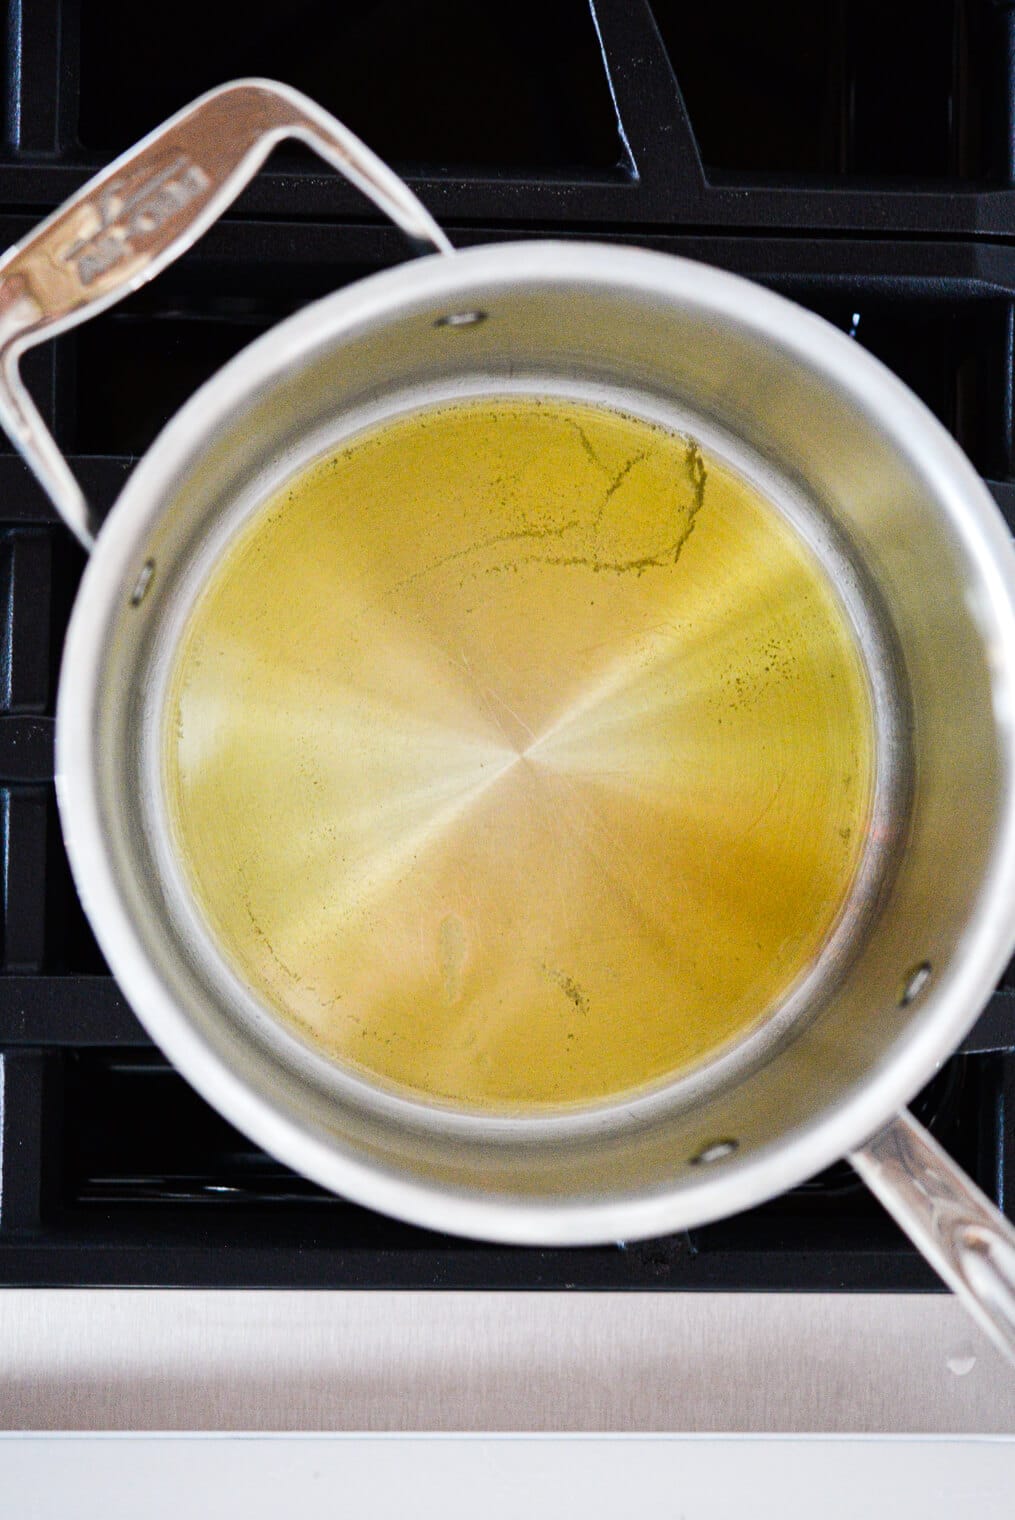 Stainless steel pot with bottom coated in oil sitting on stovetop